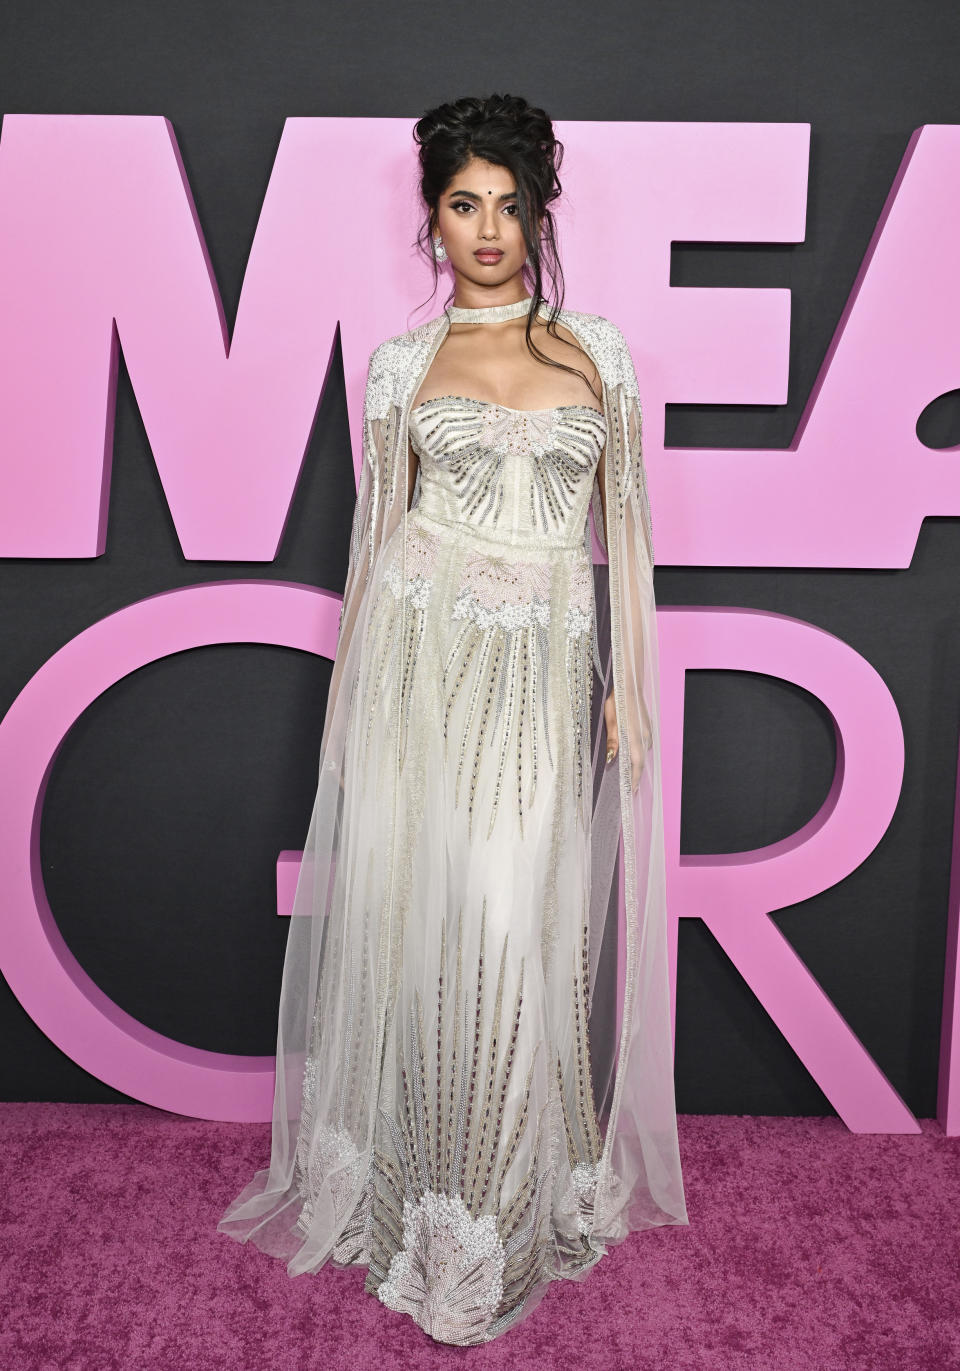 Avantika attends the world premiere of "Mean Girls" at AMC Lincoln Square on Monday, Jan. 8, 2024, in New York. (Photo by Evan Agostini/Invision/AP)